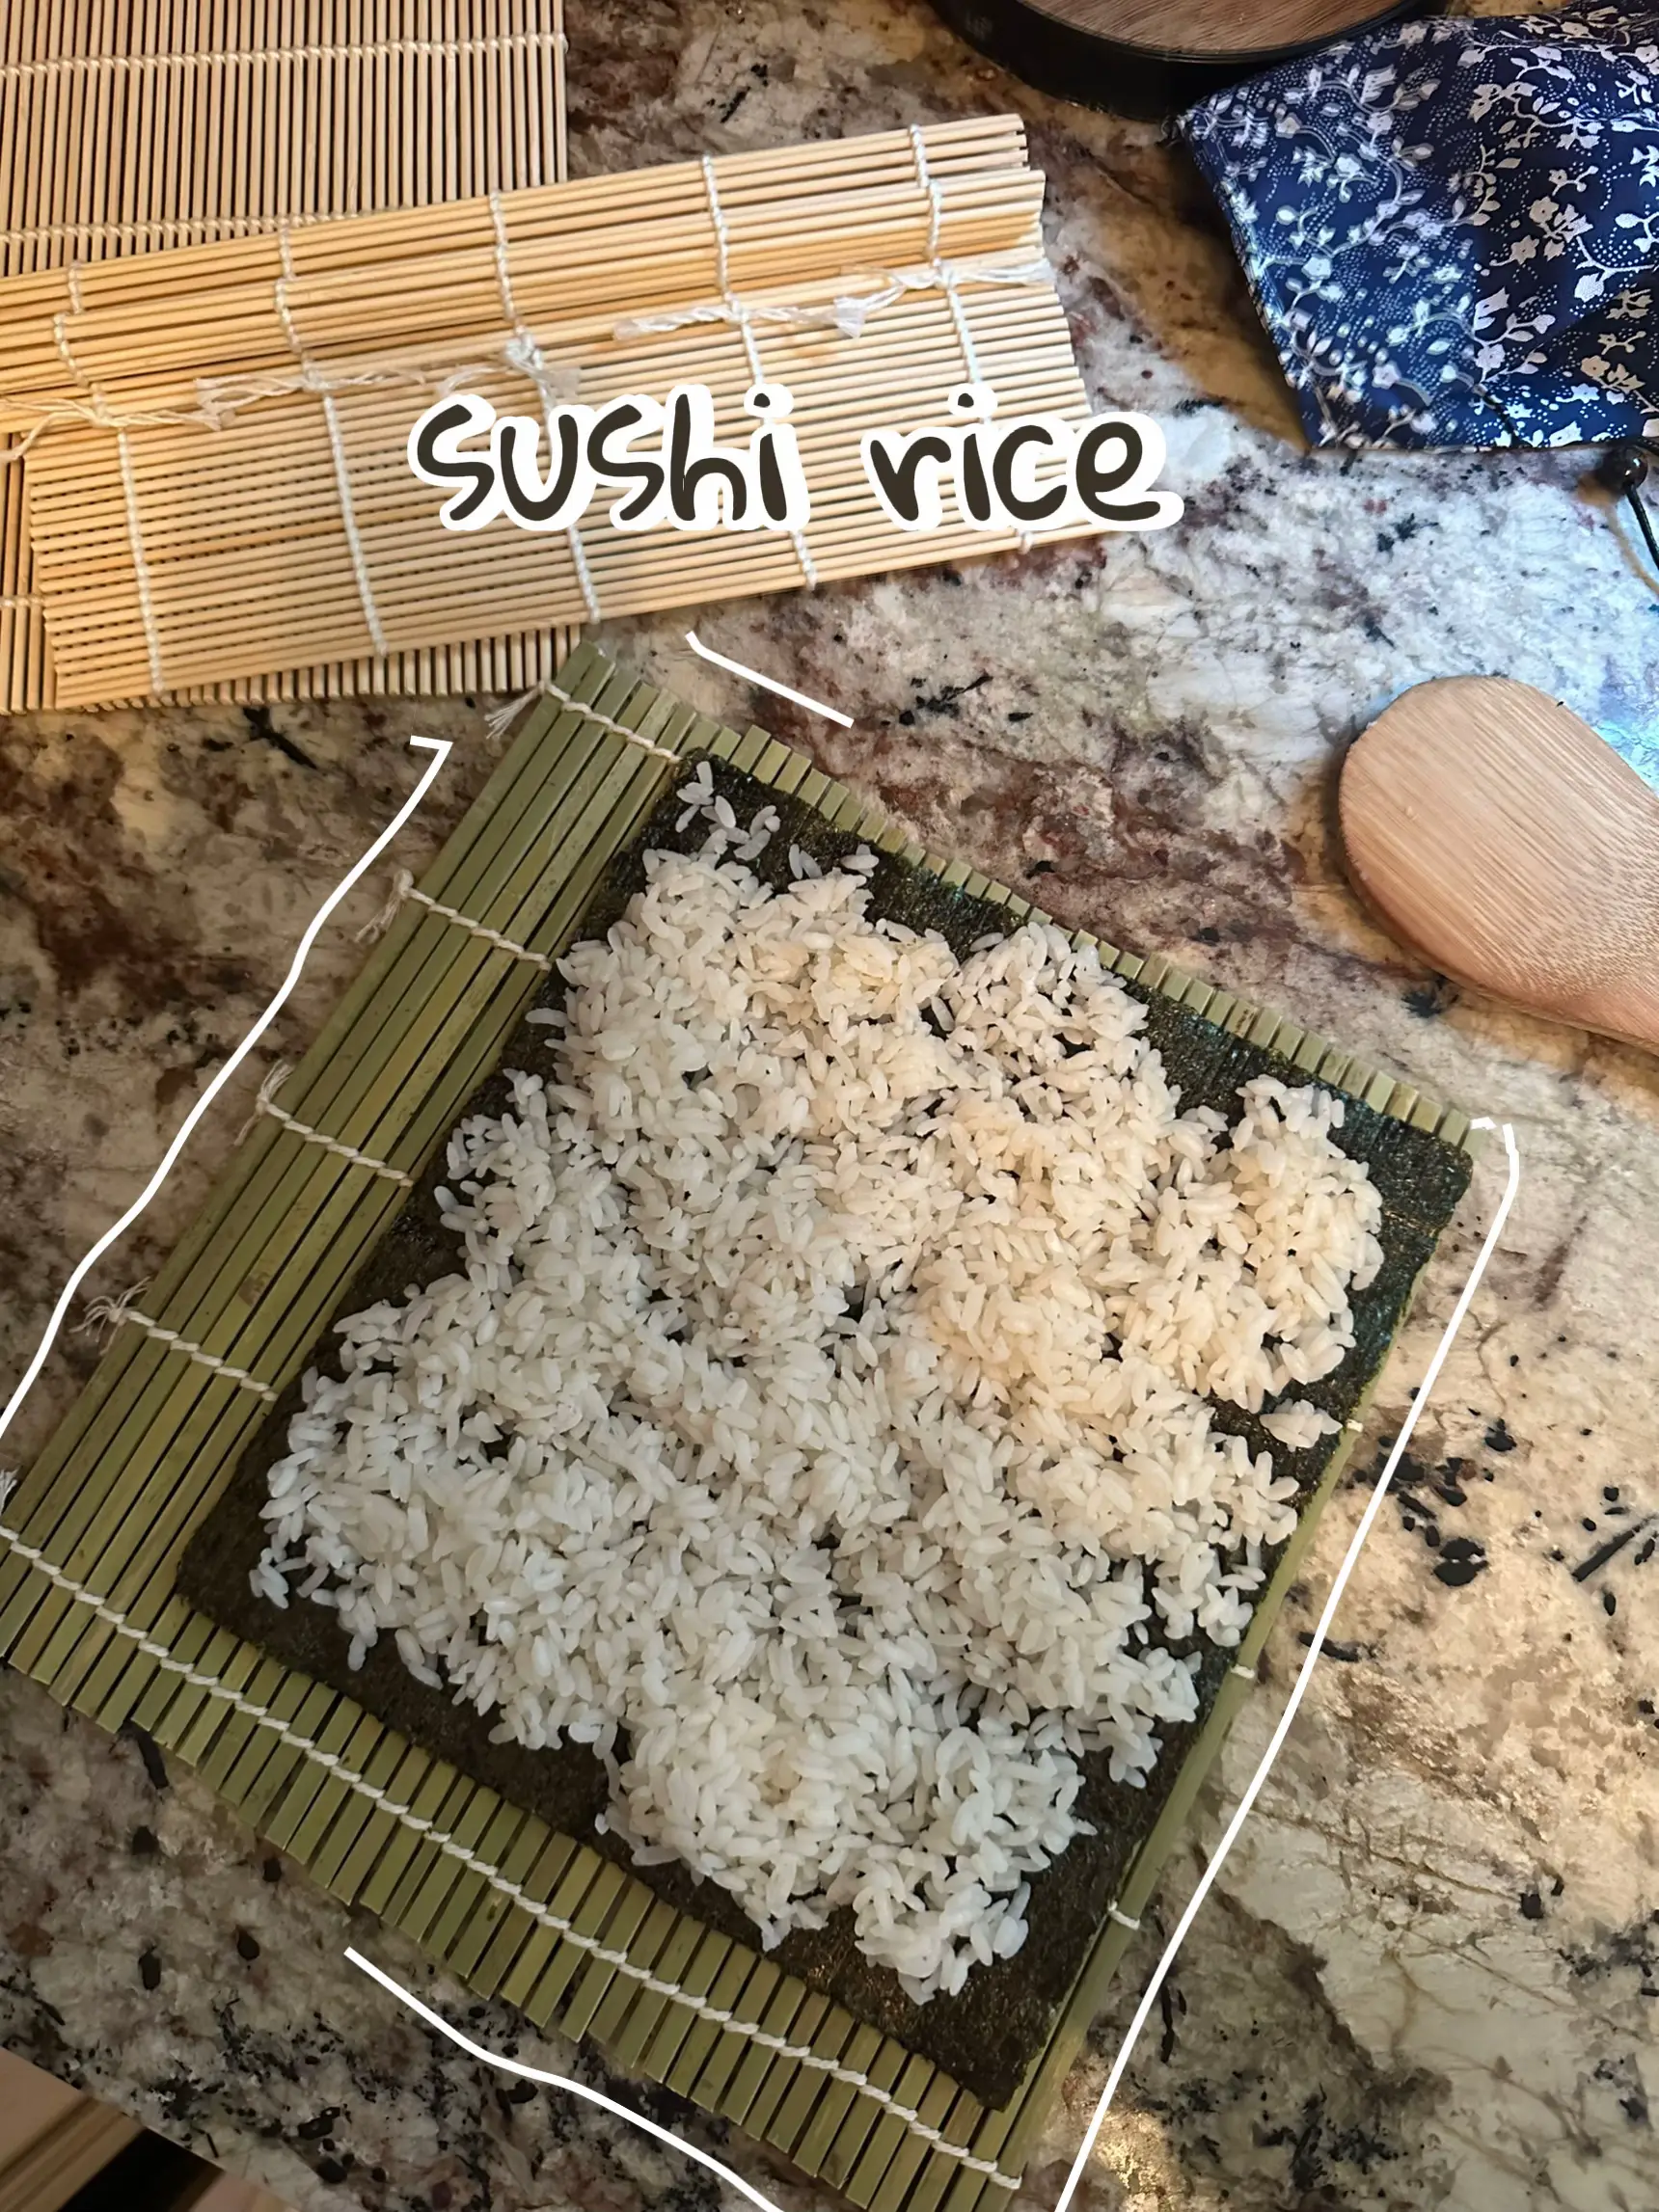 This Sushi Model Kit Features 366 Pieces of Rice